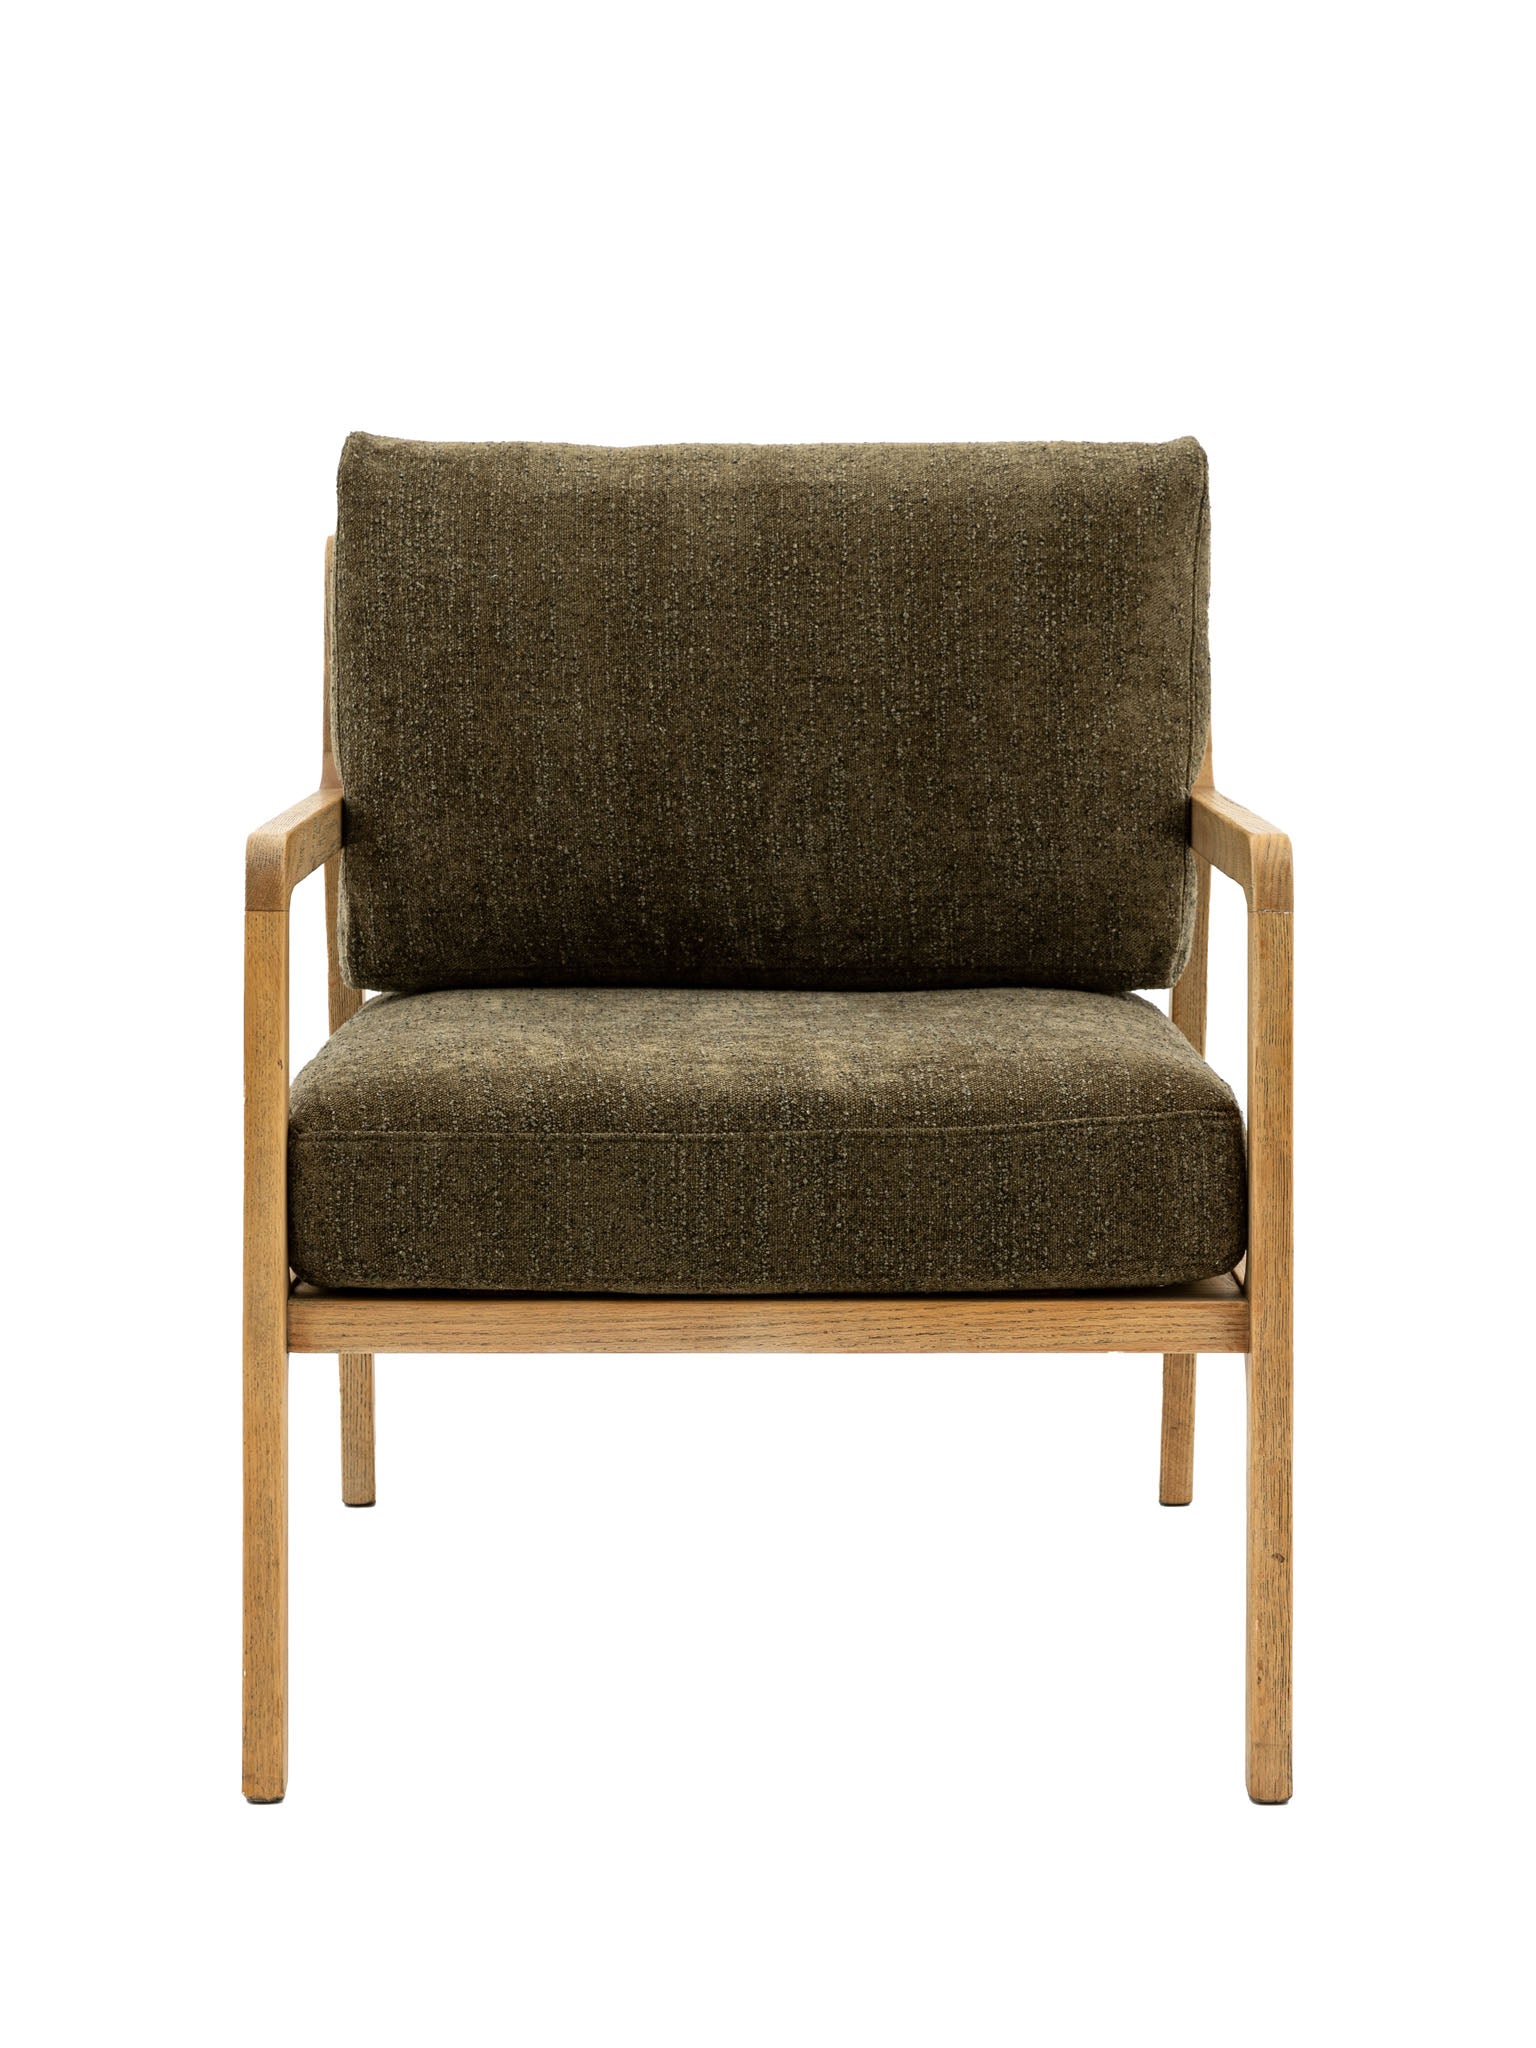 Retro style Moss Green armchair with Wooden arms